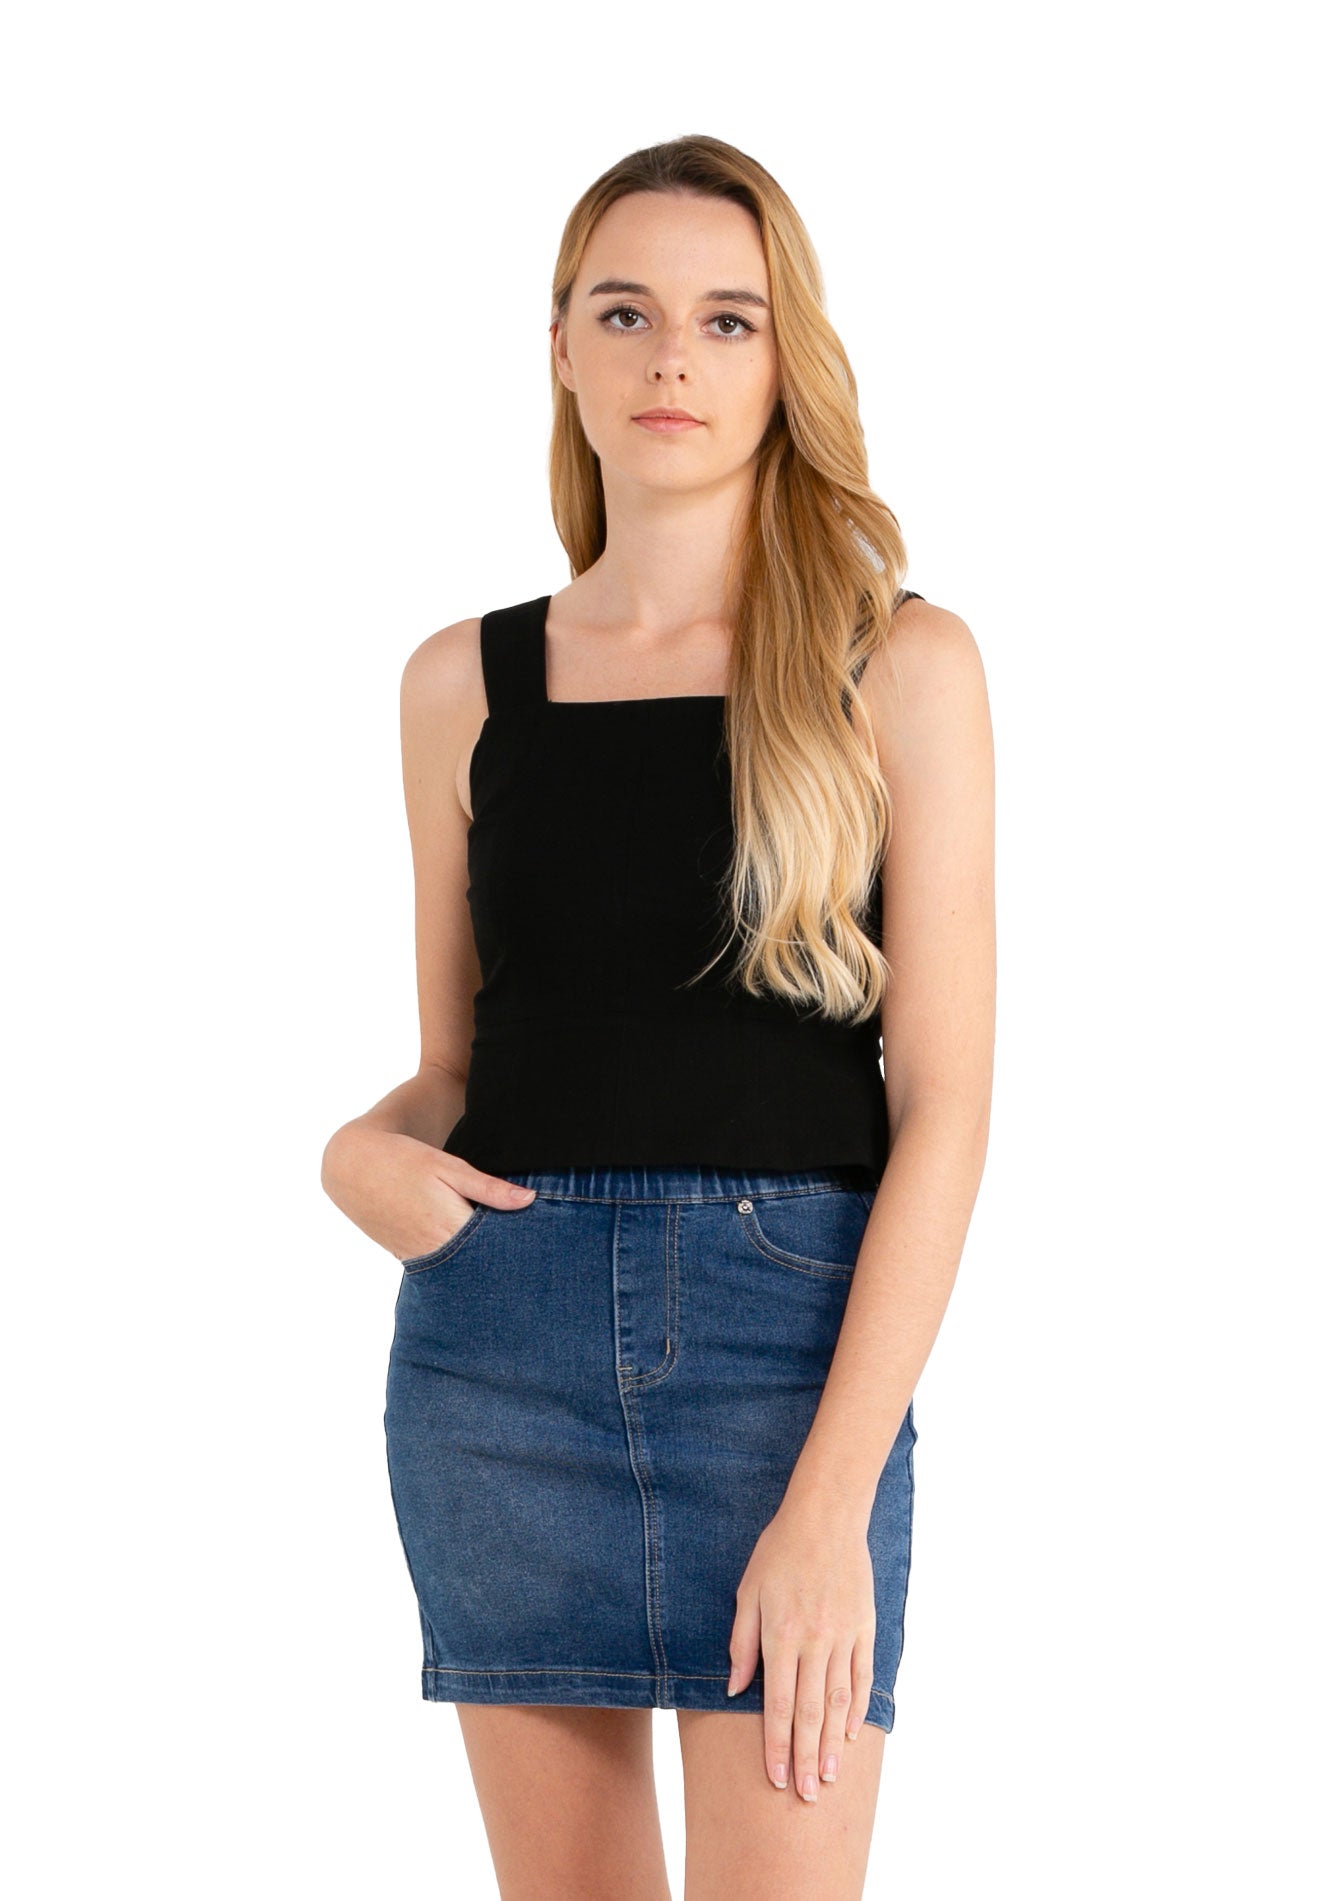 VOIR JEANS Sleeveless Square Neck Top with Back Zipper